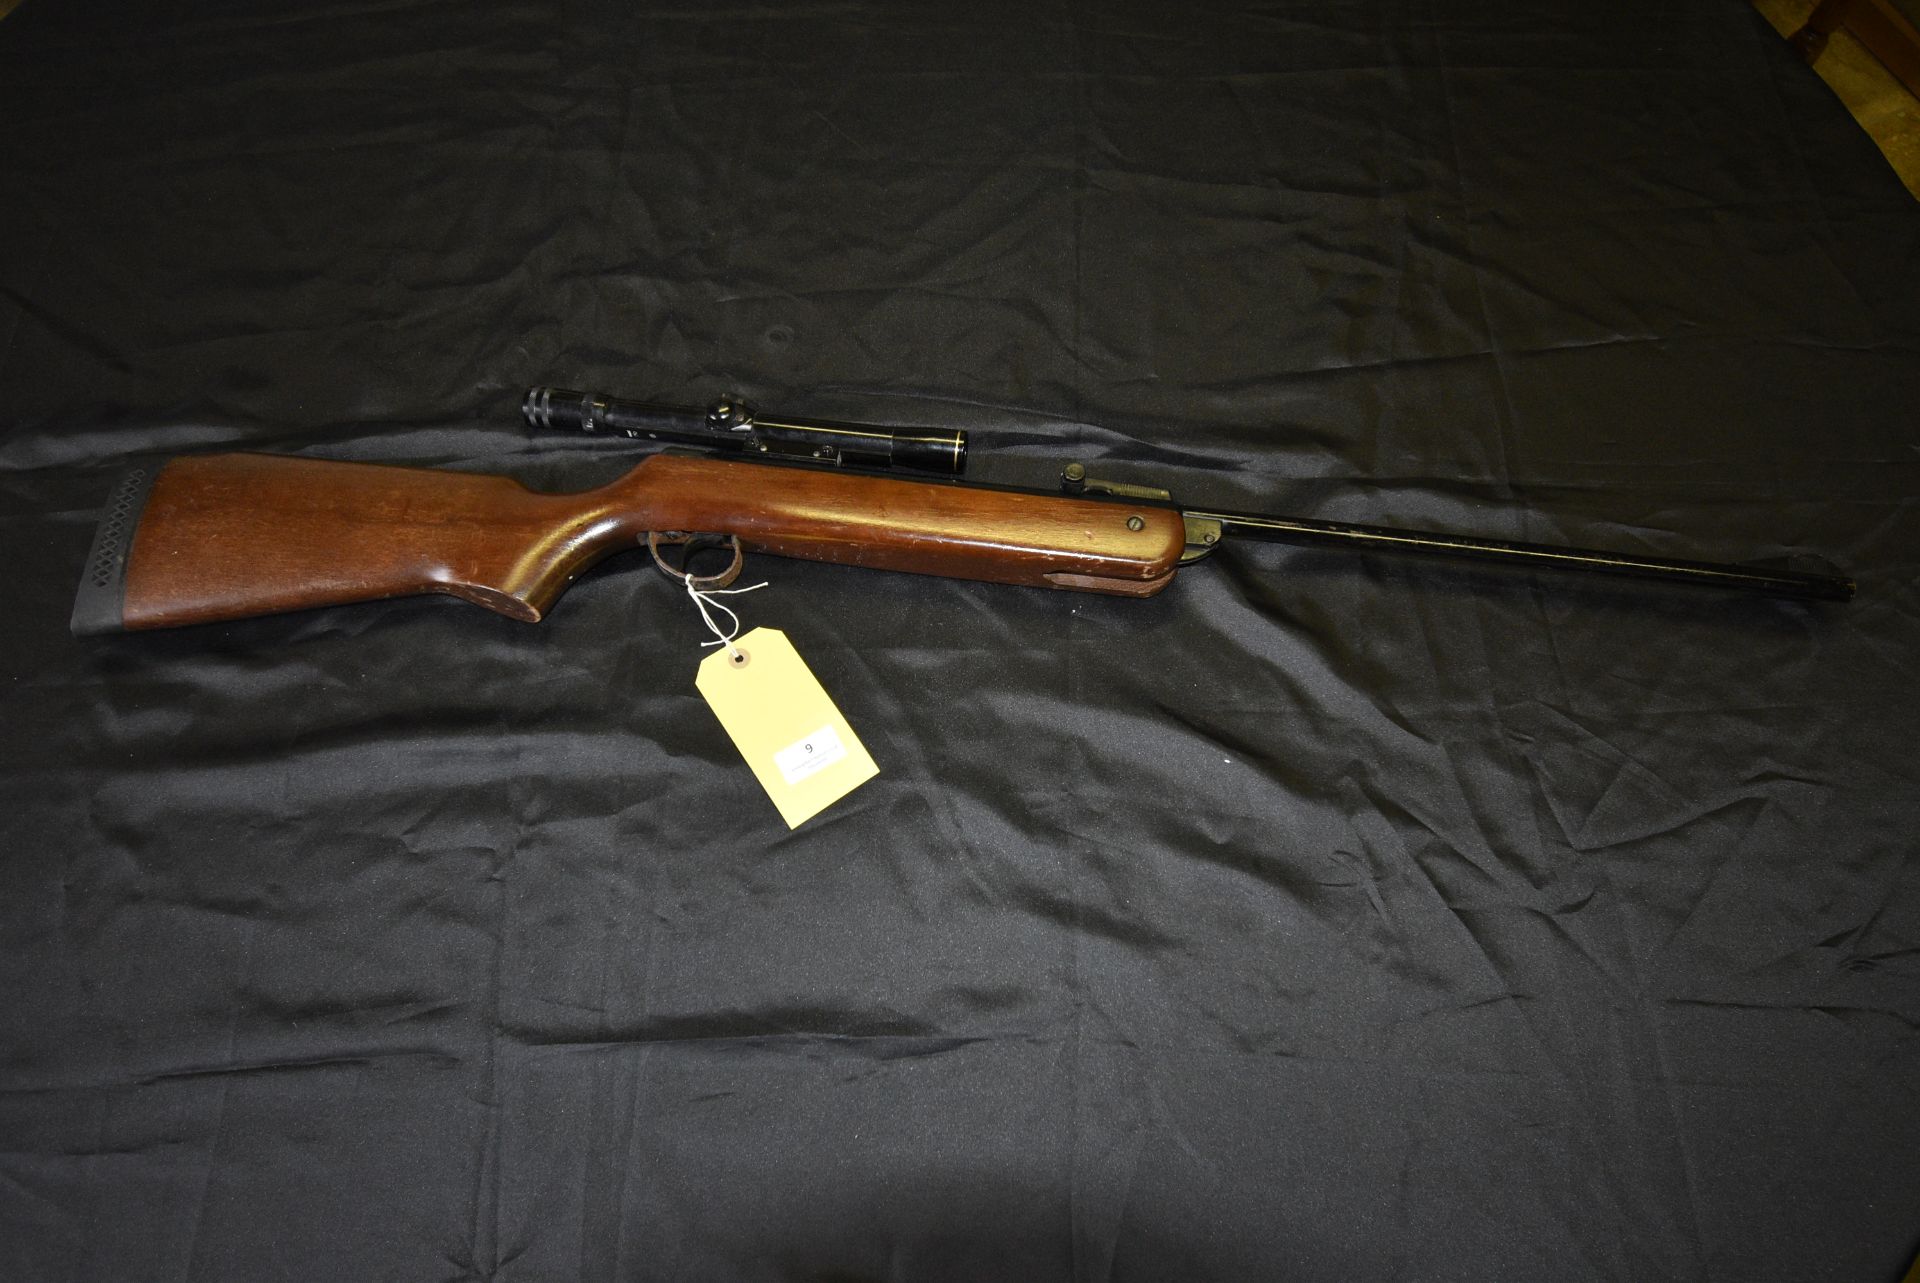 BSA Meteor 177 Air Rifle Serial No. NH82904 with RSA 40x20 Telescopic Sight - Image 3 of 4